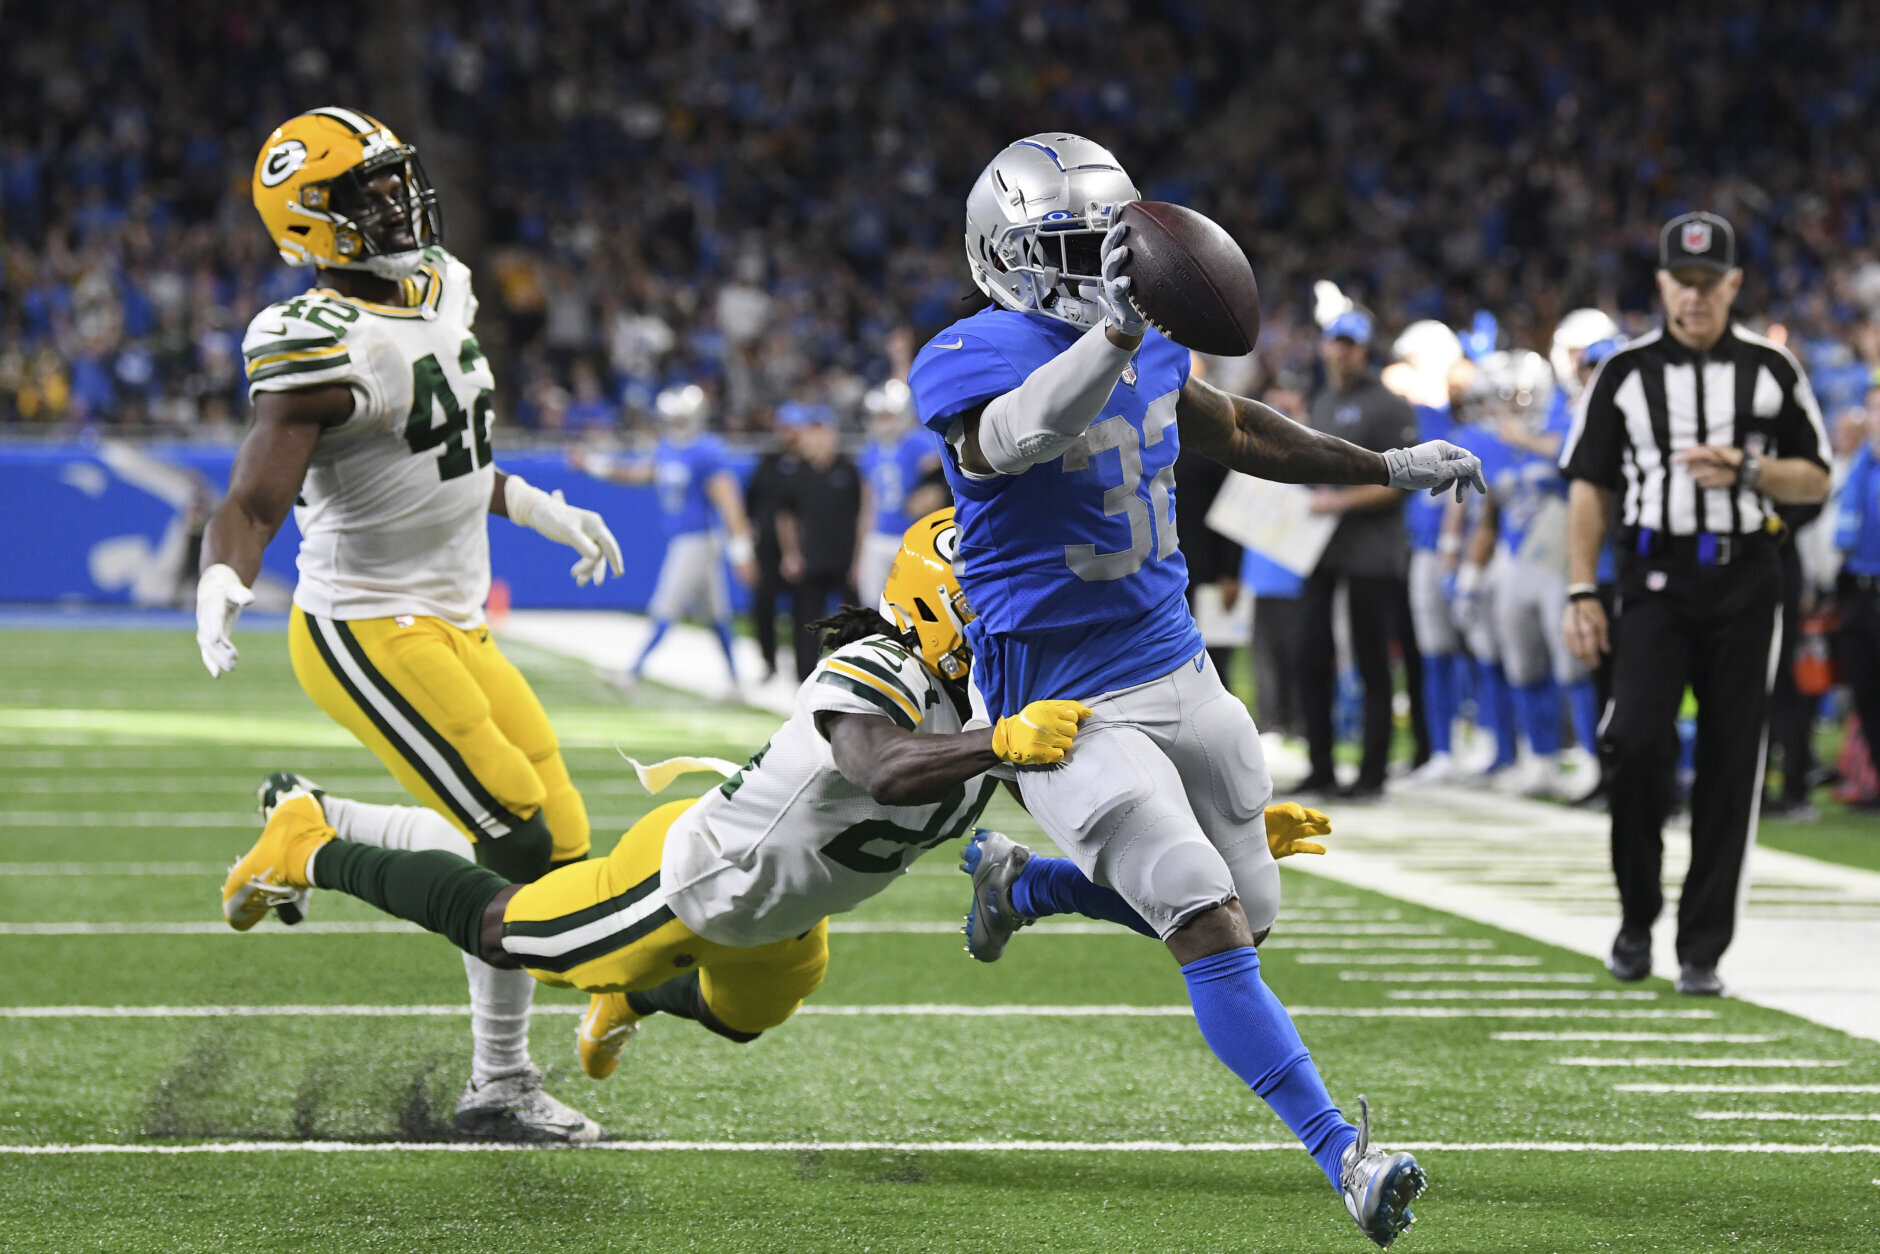 <p><em><strong>Packers 30</strong></em><br />
<em><strong>Lions 37</strong></em></p>
<p>Memo to Aaron Rodgers: Your 38:0 TD-to-INT ratio in division play since 2020 won&#8217;t be easily replicated if you leave the NFC North — especially if you go to Denver in the stacked AFC West. If you really want a late-career Super Bowl, staying in Green Bay is by far your best option.</p>
<p>Detroit will pick second overall in the 2022 NFL draft and they have to hope the Michigan homeboy Aiden Hutchinson is still on the board when they&#8217;re on the clock. I know the Packers sat their starters in the second half Sunday but the Lions aren&#8217;t as far from competitive as their record suggests.</p>
